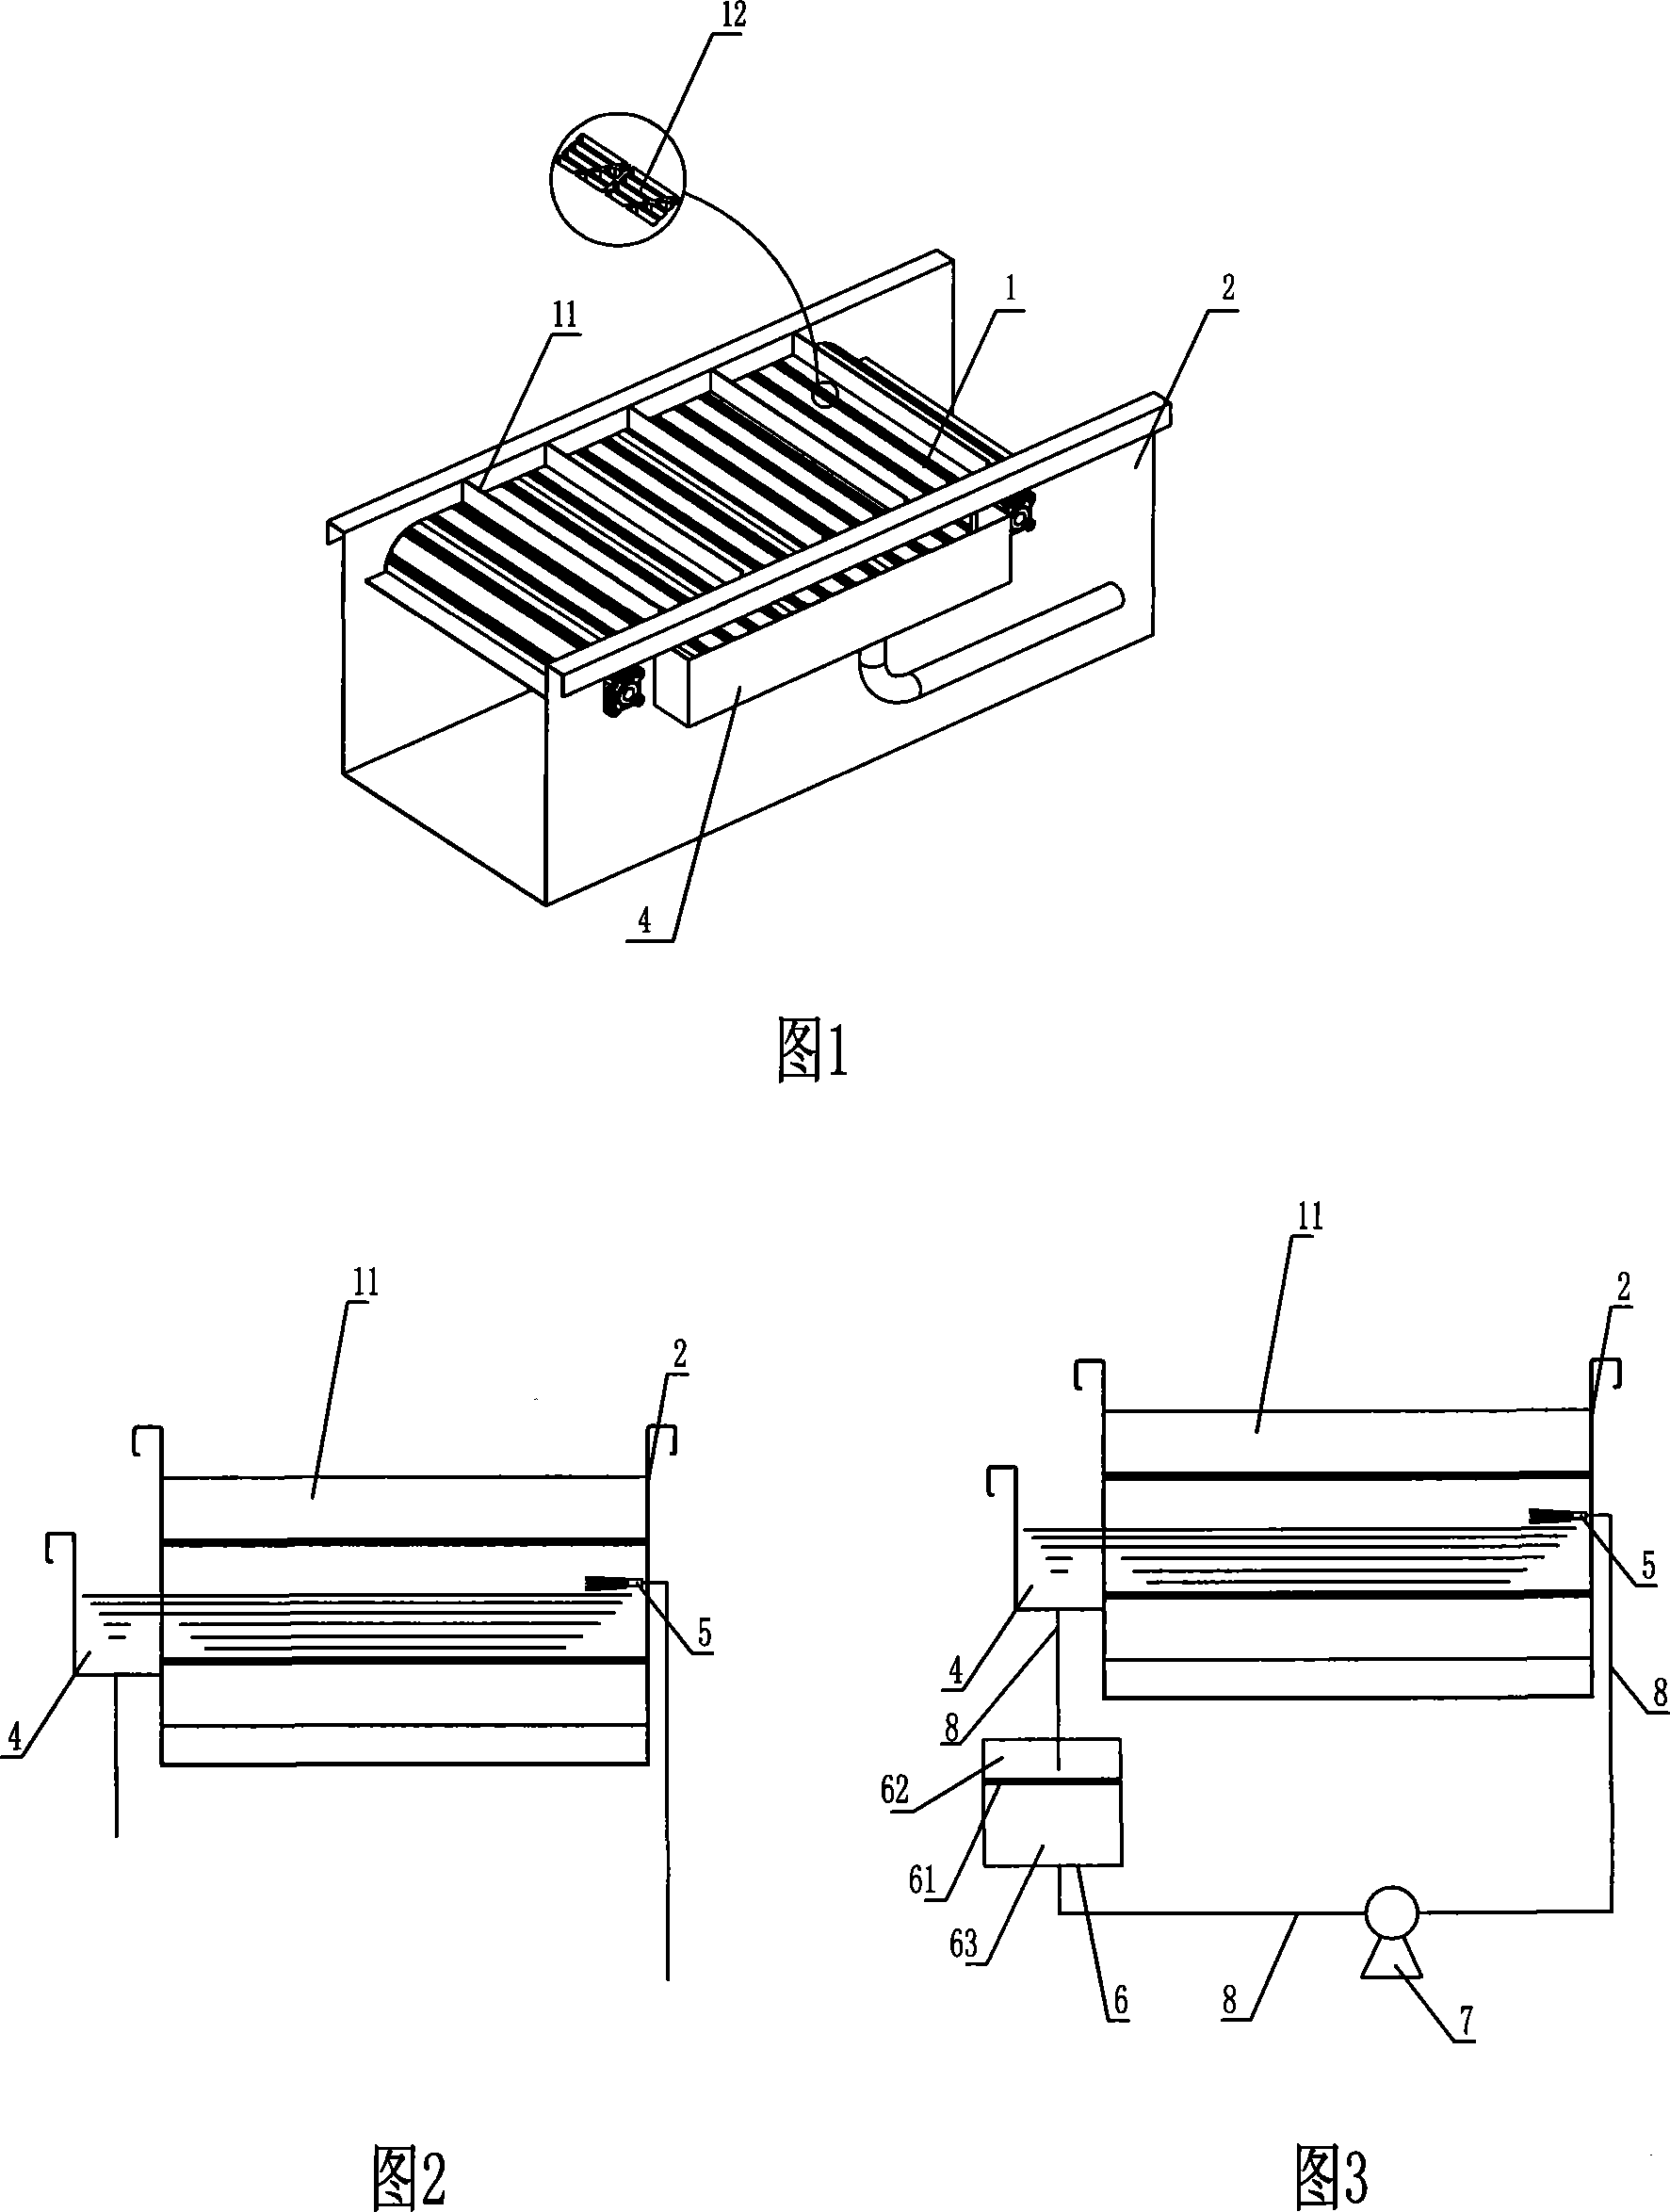 Separating filtering sieve plate device for cleaning fruit and vegetable